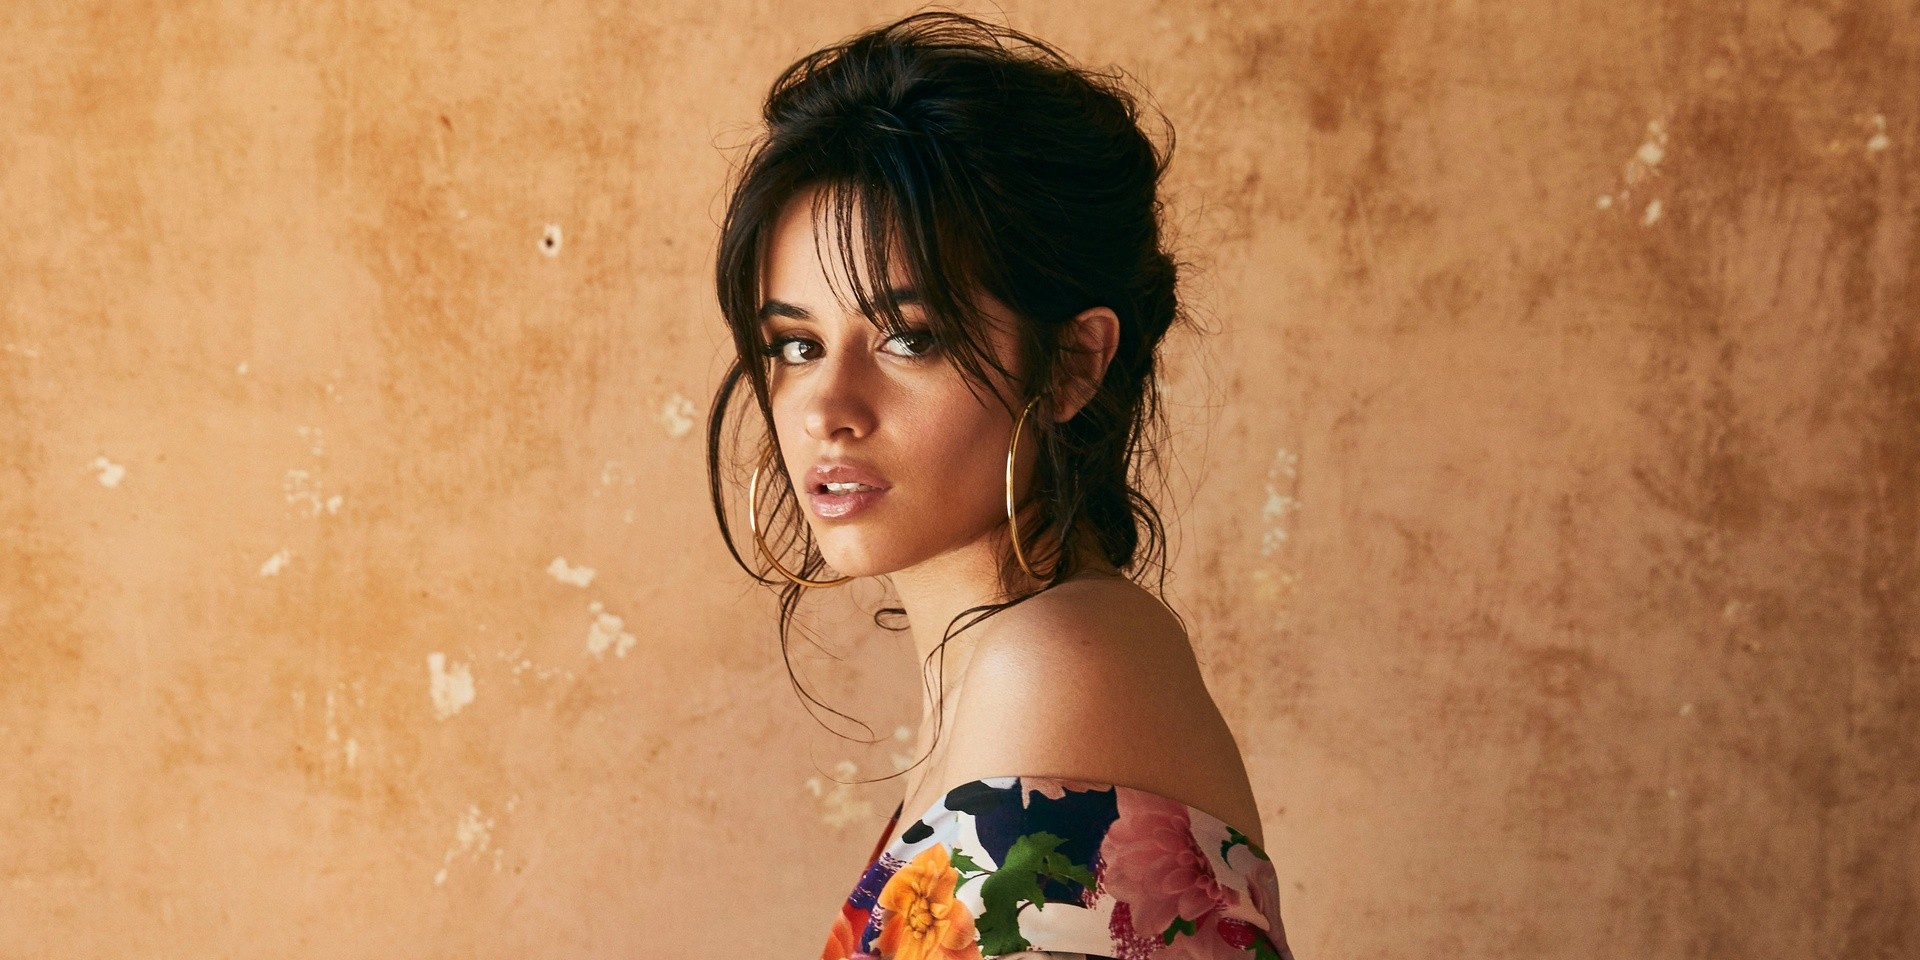 Camila Cabello shares cryptic video, teases new music
